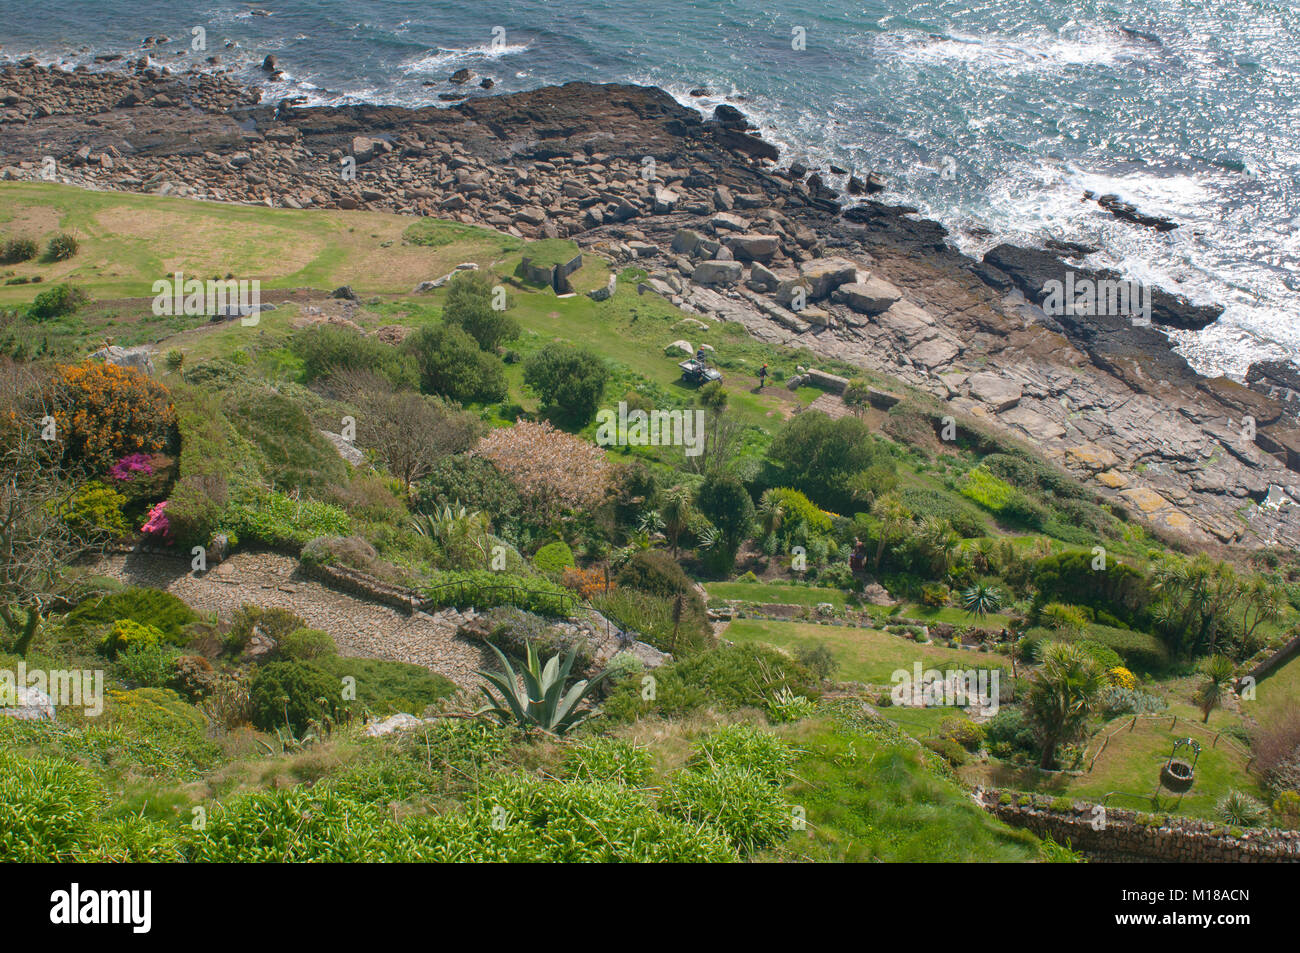 Looking down on the sub tropical gardens at St. Michael's Mount, Cornwall, UK - John Gollop Stock Photo